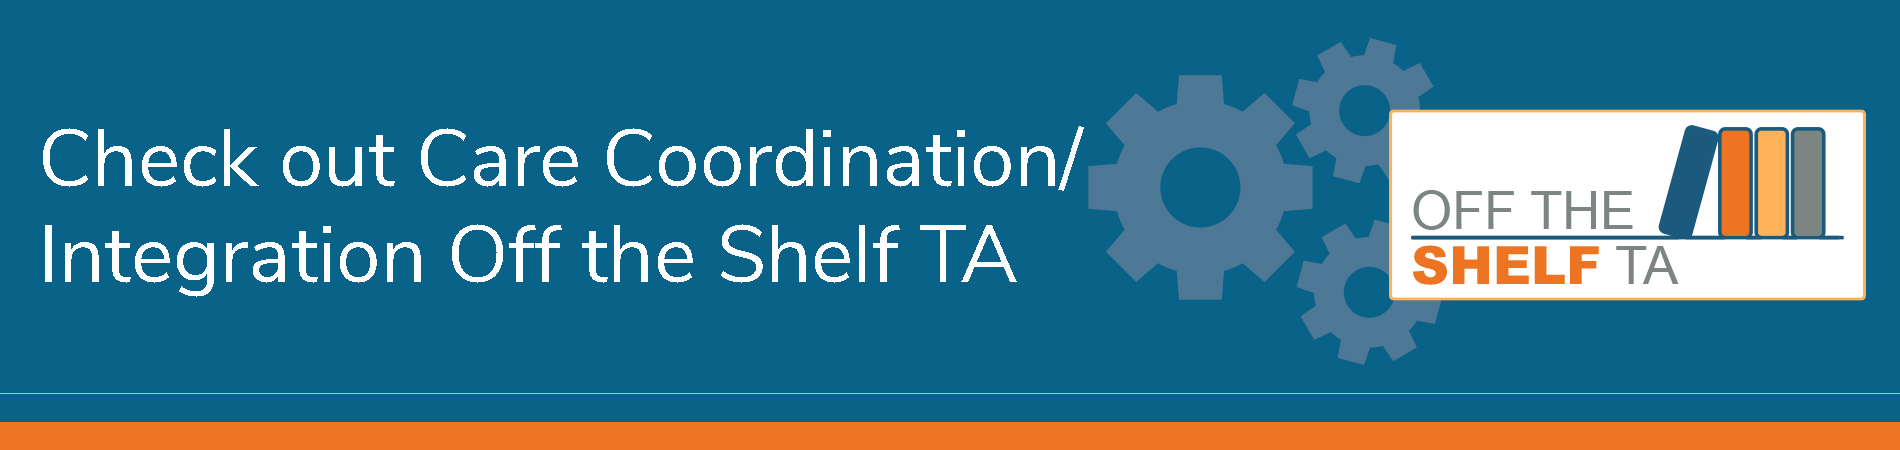 Check out Care Coordination/Integration Off the Shelf TA